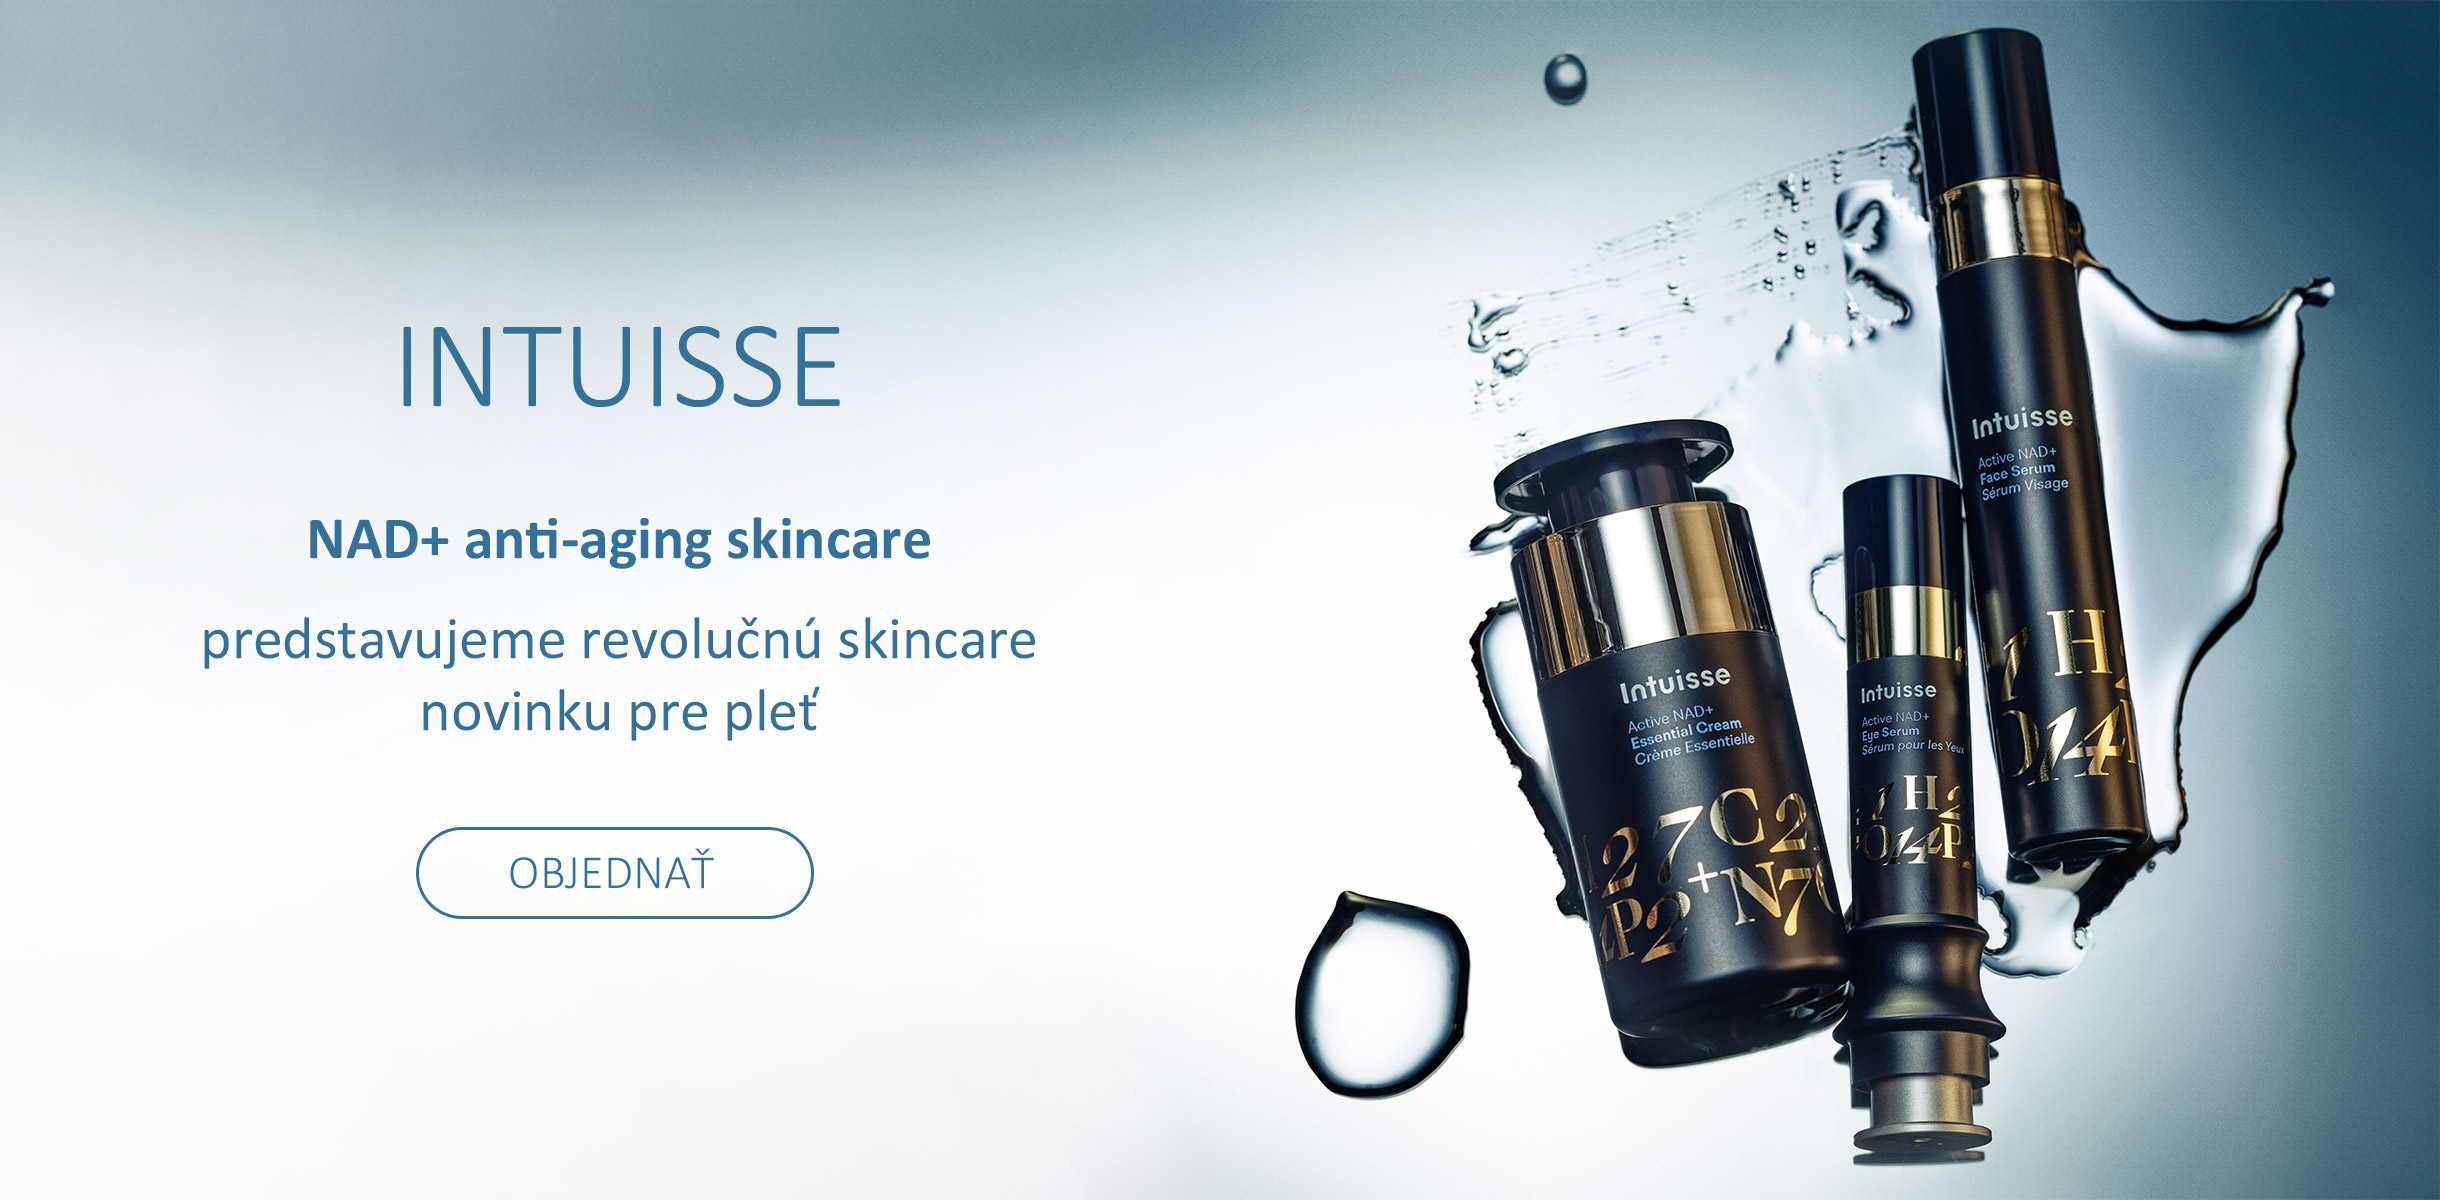 knowskincare-intuisse-sk